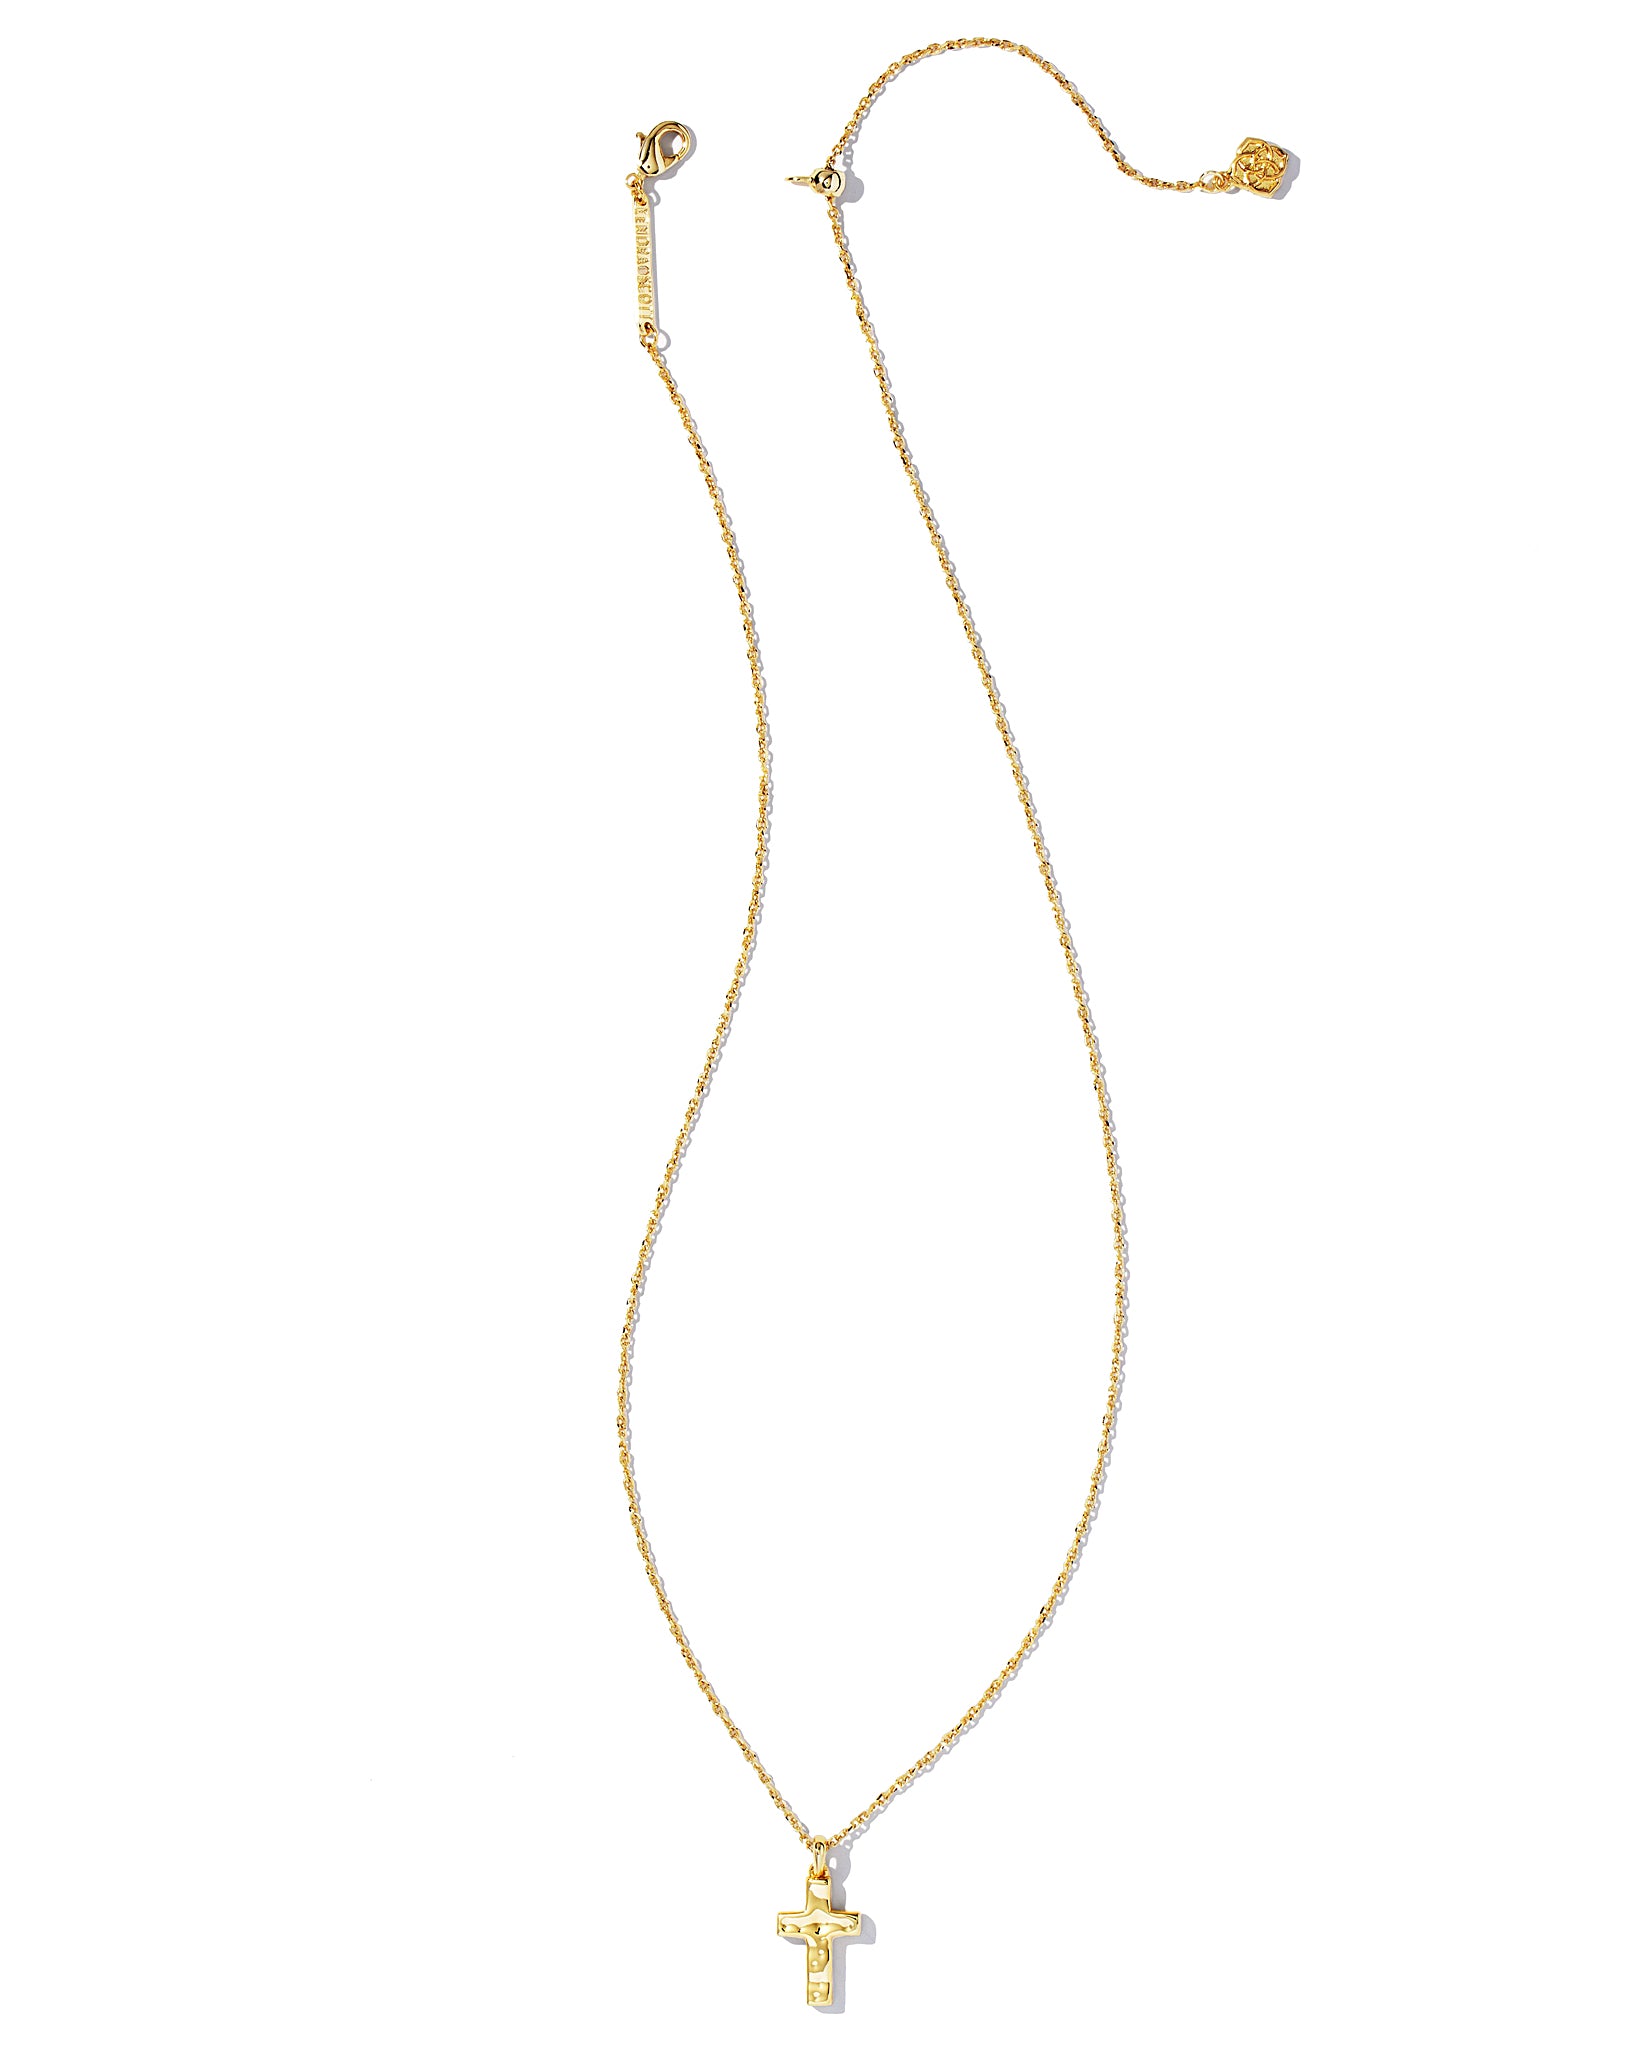 Kendra Scott Cross Pendant Necklace in Hammered Gold Plated